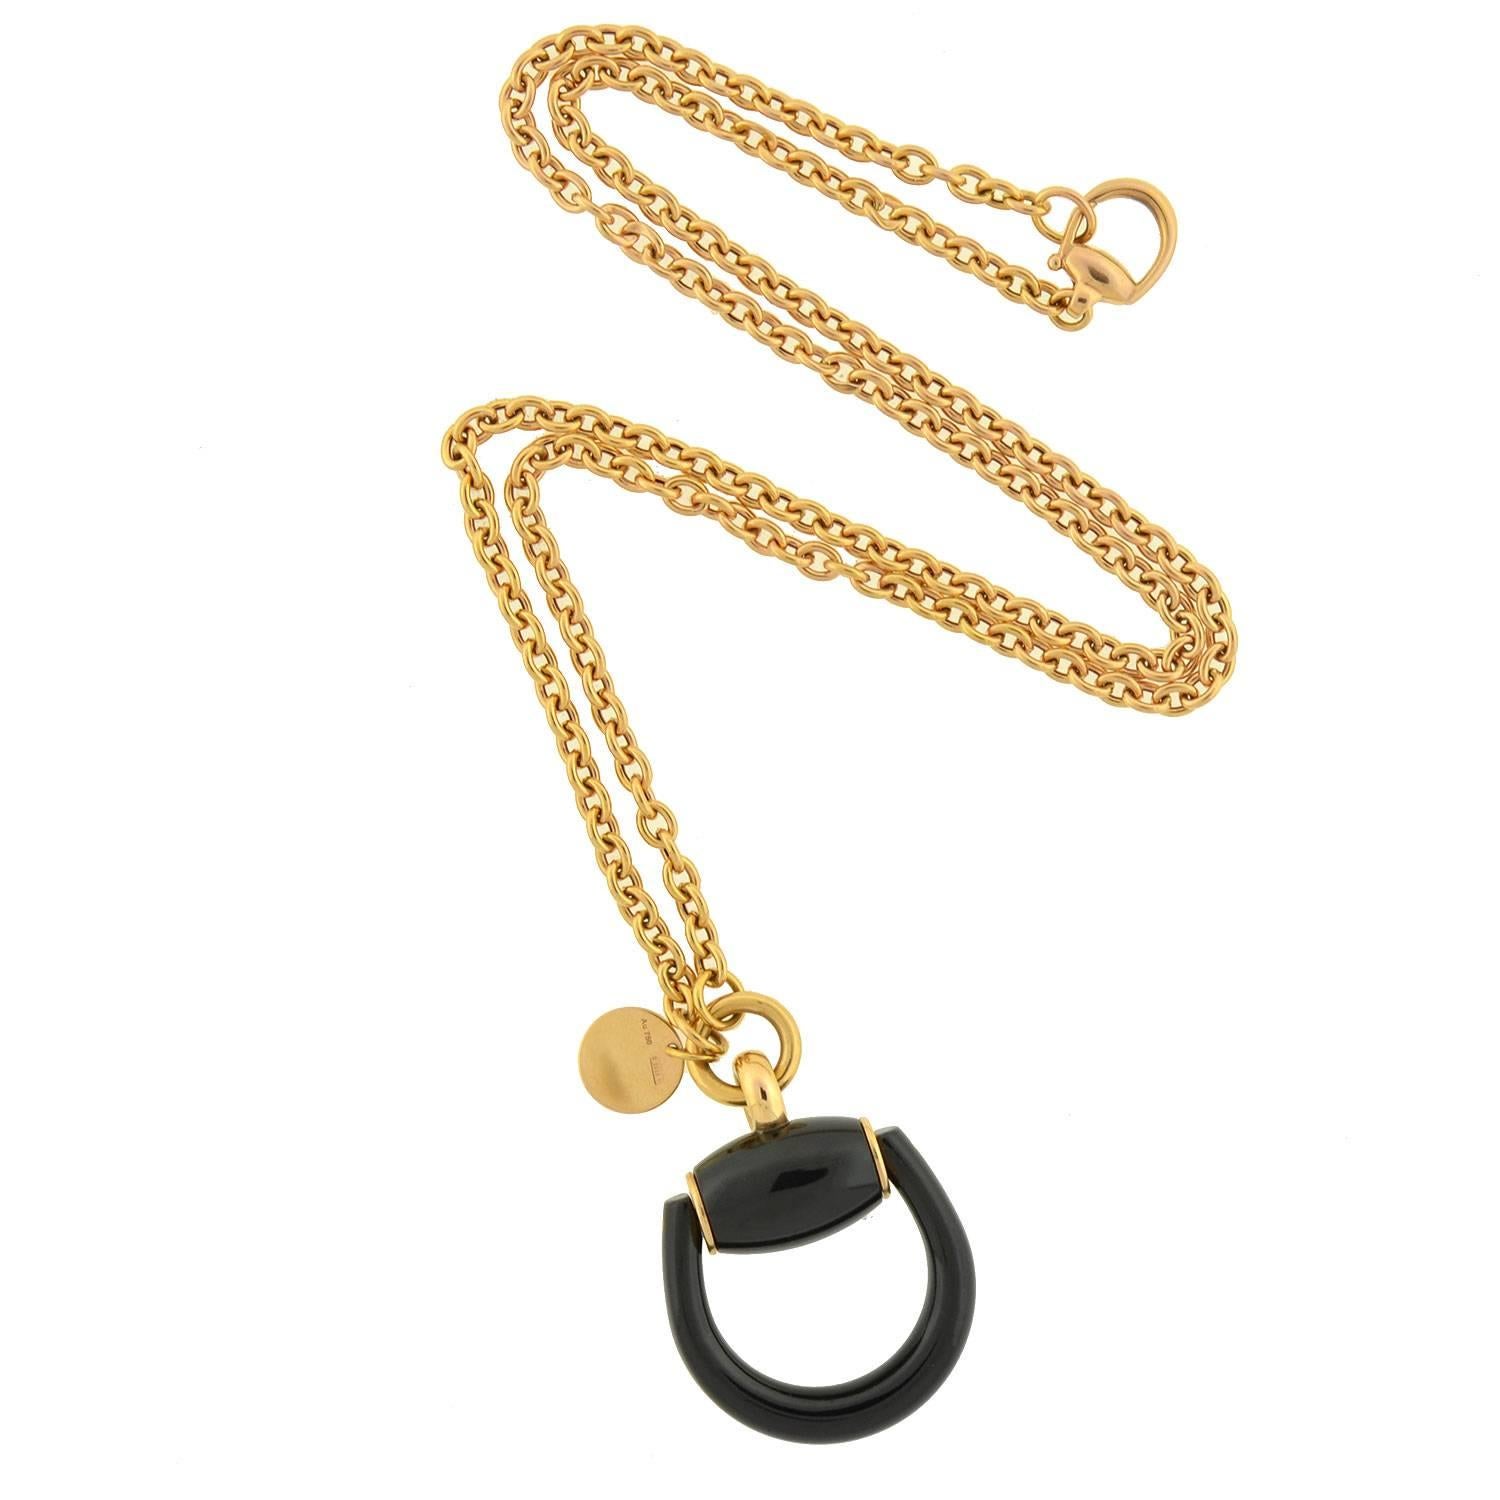 A fabulous estate horse bit necklace from legendary maker Gucci! This stylish contemporary piece has wonderful equestrian flair in a wearable everyday design. The necklace is comprised of a large 3-dimensional horse bit pendant that hangs from a